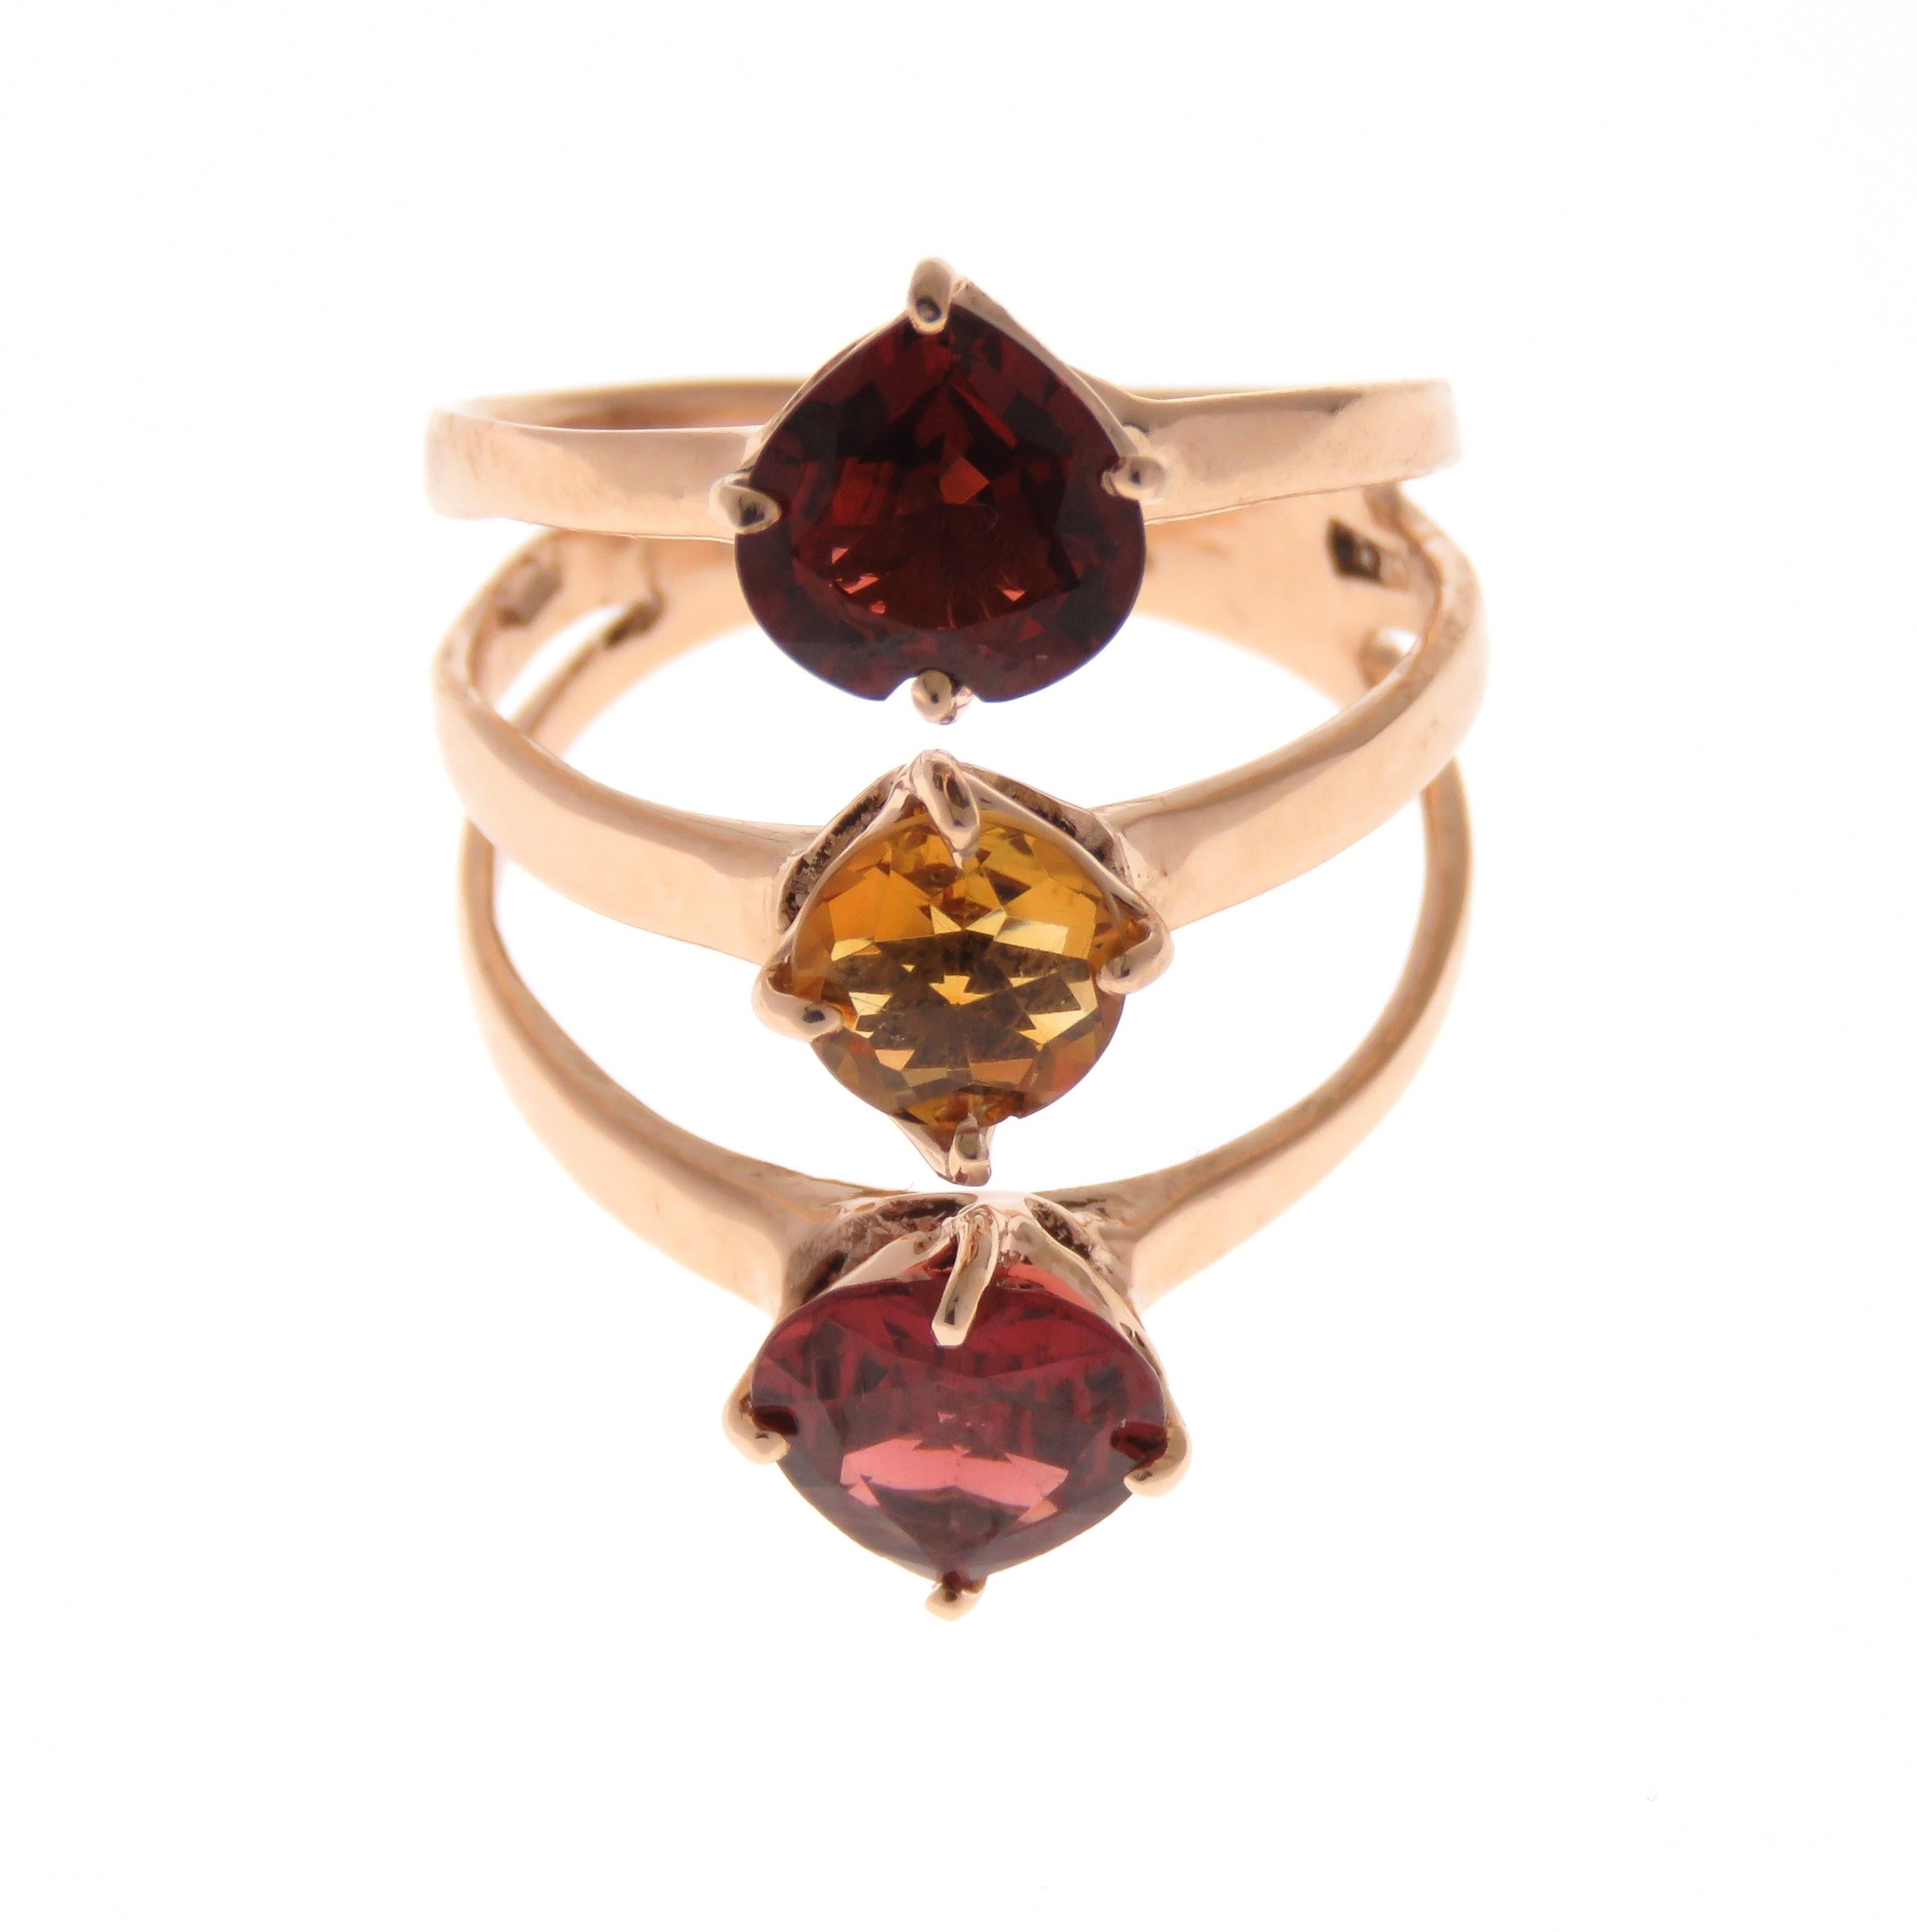 Heart Cut Garnet Rose Cut Citrine 9 Karat Rose Gold Ring Handcrafted in Italy In New Condition For Sale In Milano, IT